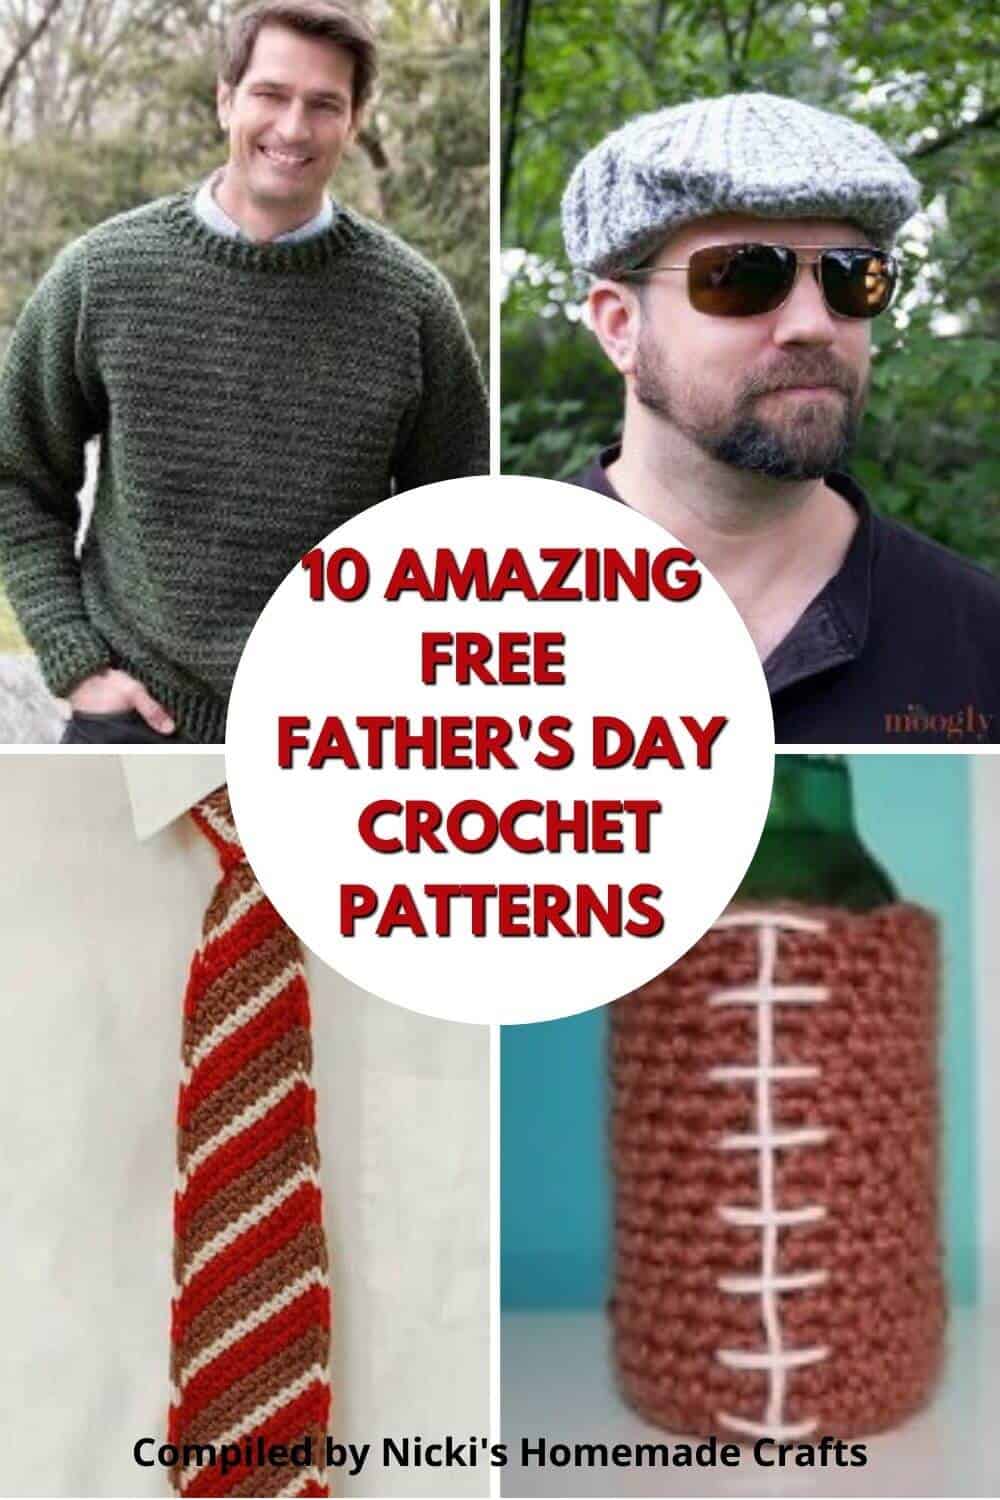 10 Amazing Free Father's Day Crochet Patterns are the Perfect Gift Ideas